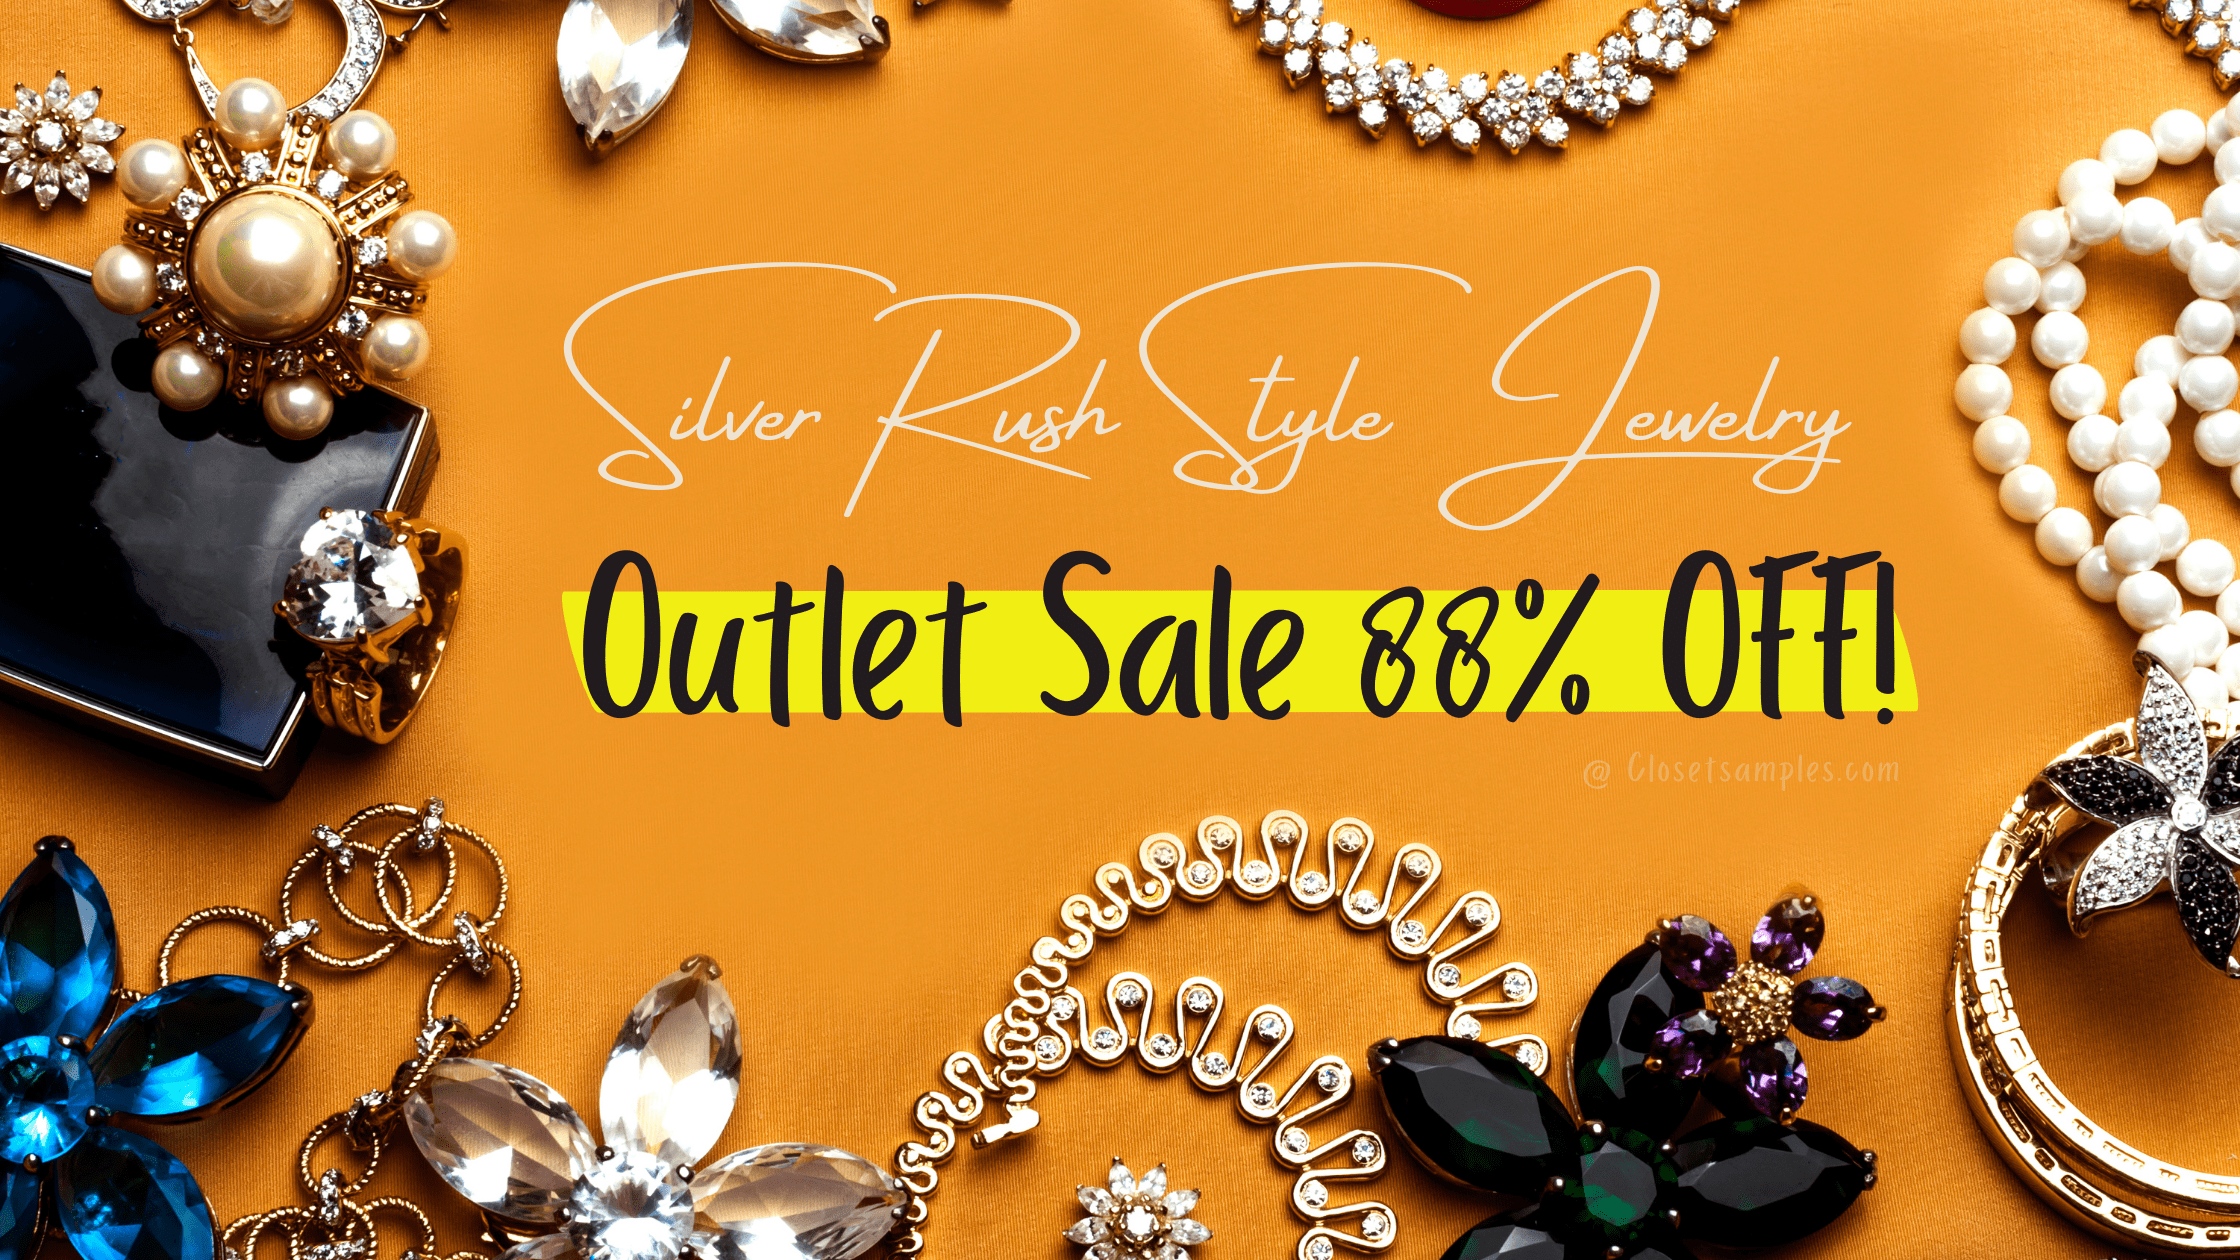 Silver-Rush-Style-Jewelry-Outlet-Sale-88percent-discount-closetsamples.png